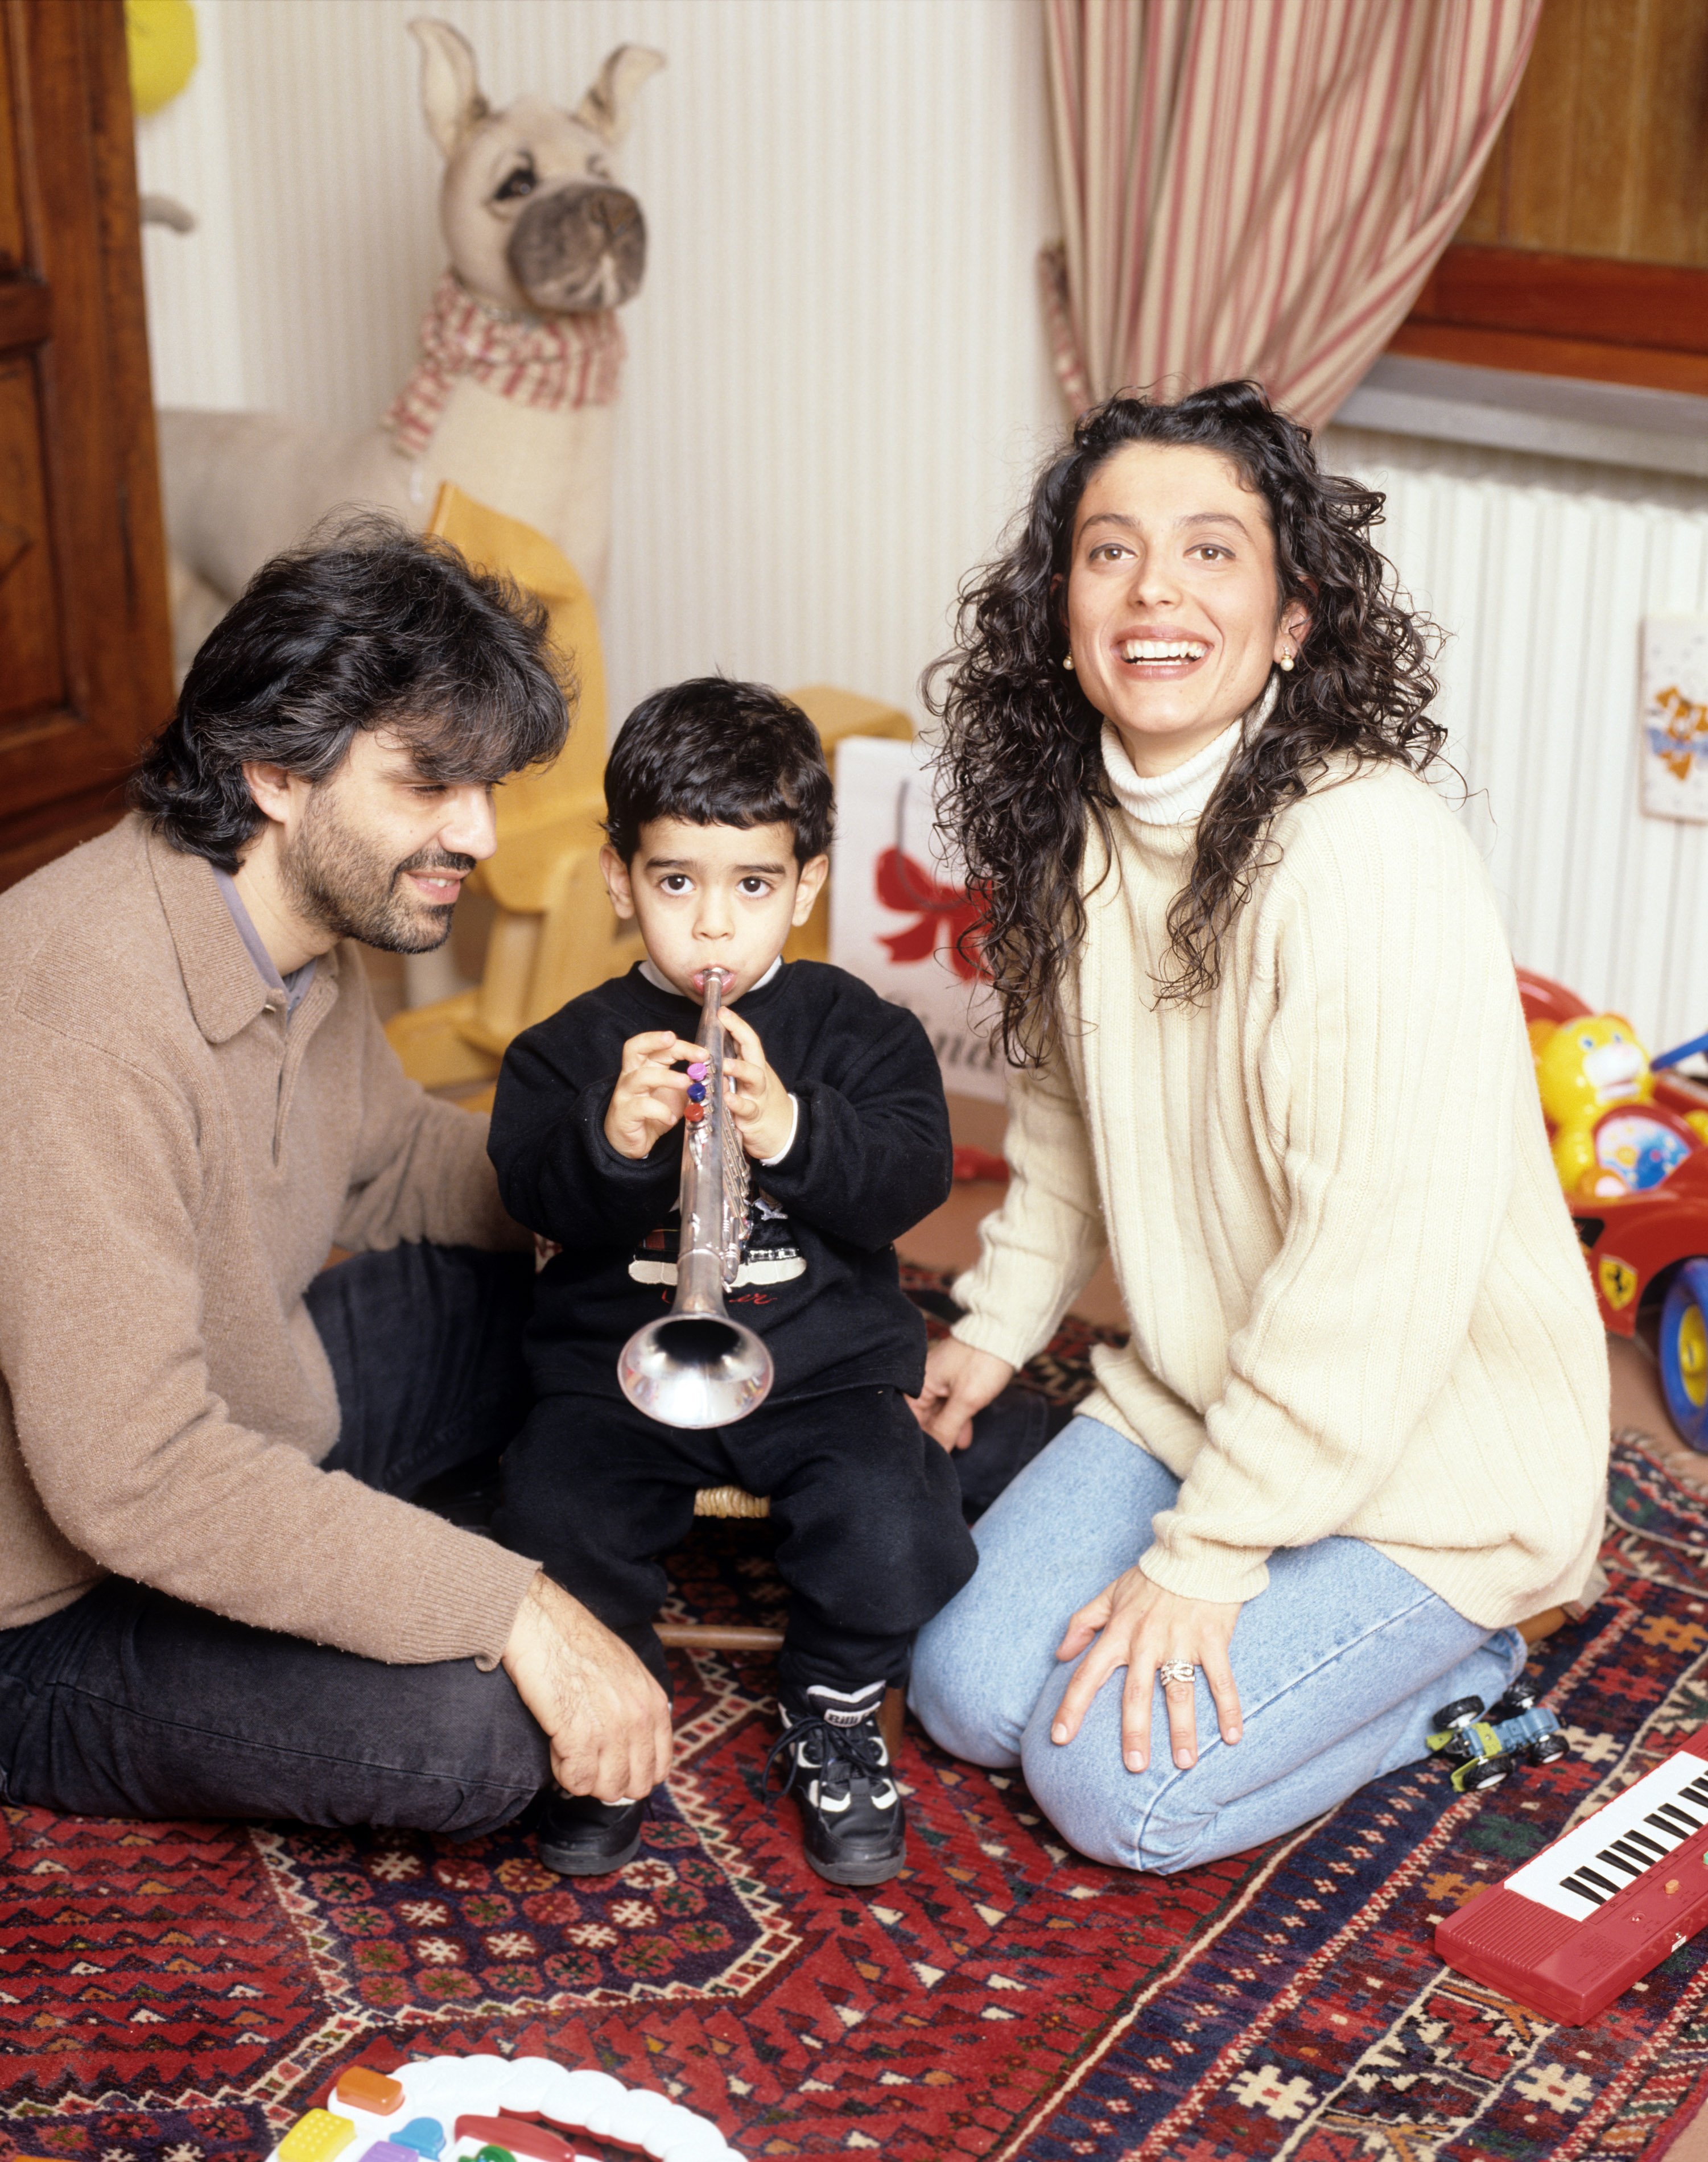 Andrea Bocelli, Enrica Cenzatti and their sons, Amos and Matteo, in Tuscany, Italy, in 1997. | Source: Getty Images